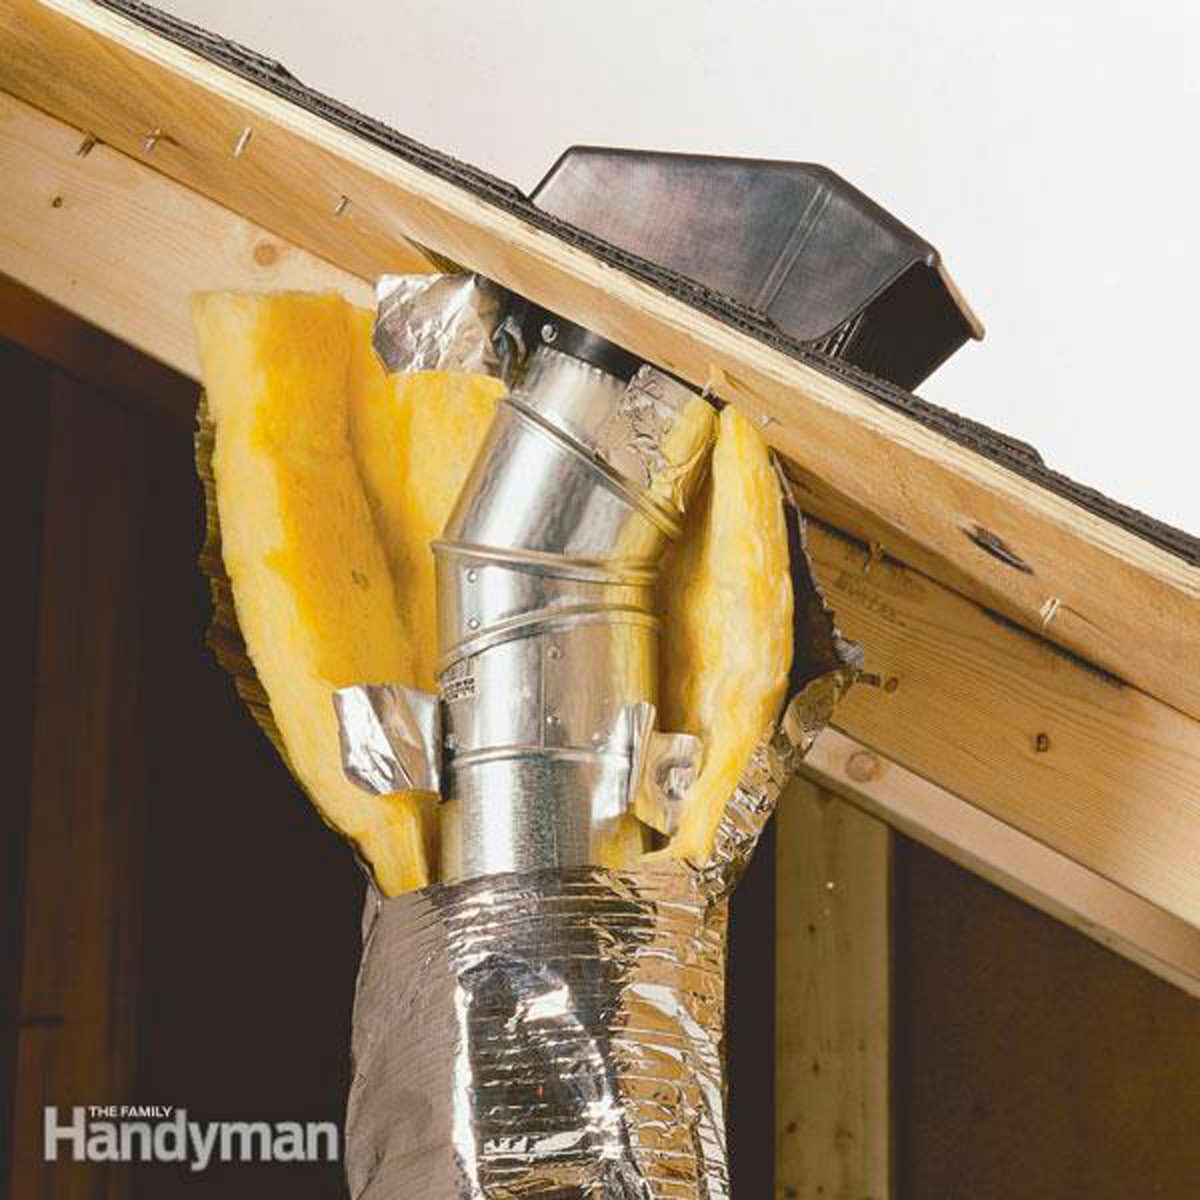 Venting Exhaust Fans Through The Roof, How To Run Bathroom Fan Vent Pipe